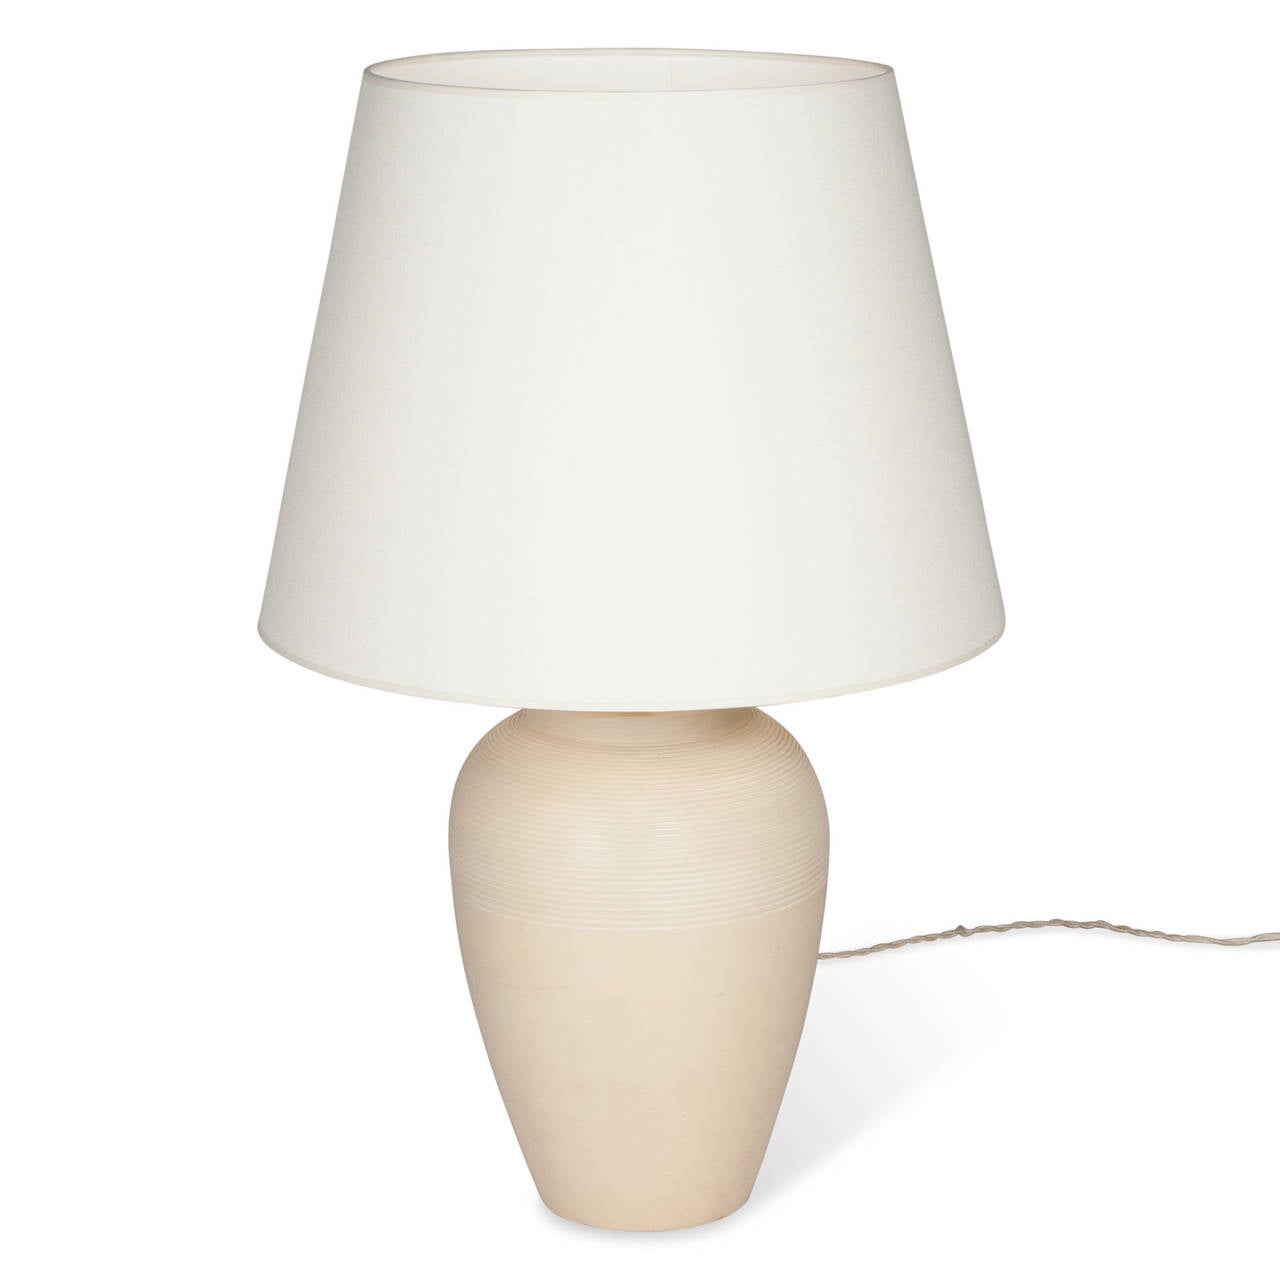 Glazed Plaster Table Lamp by Jacques Adnet, French, 1930s In Excellent Condition For Sale In Hoboken, NJ